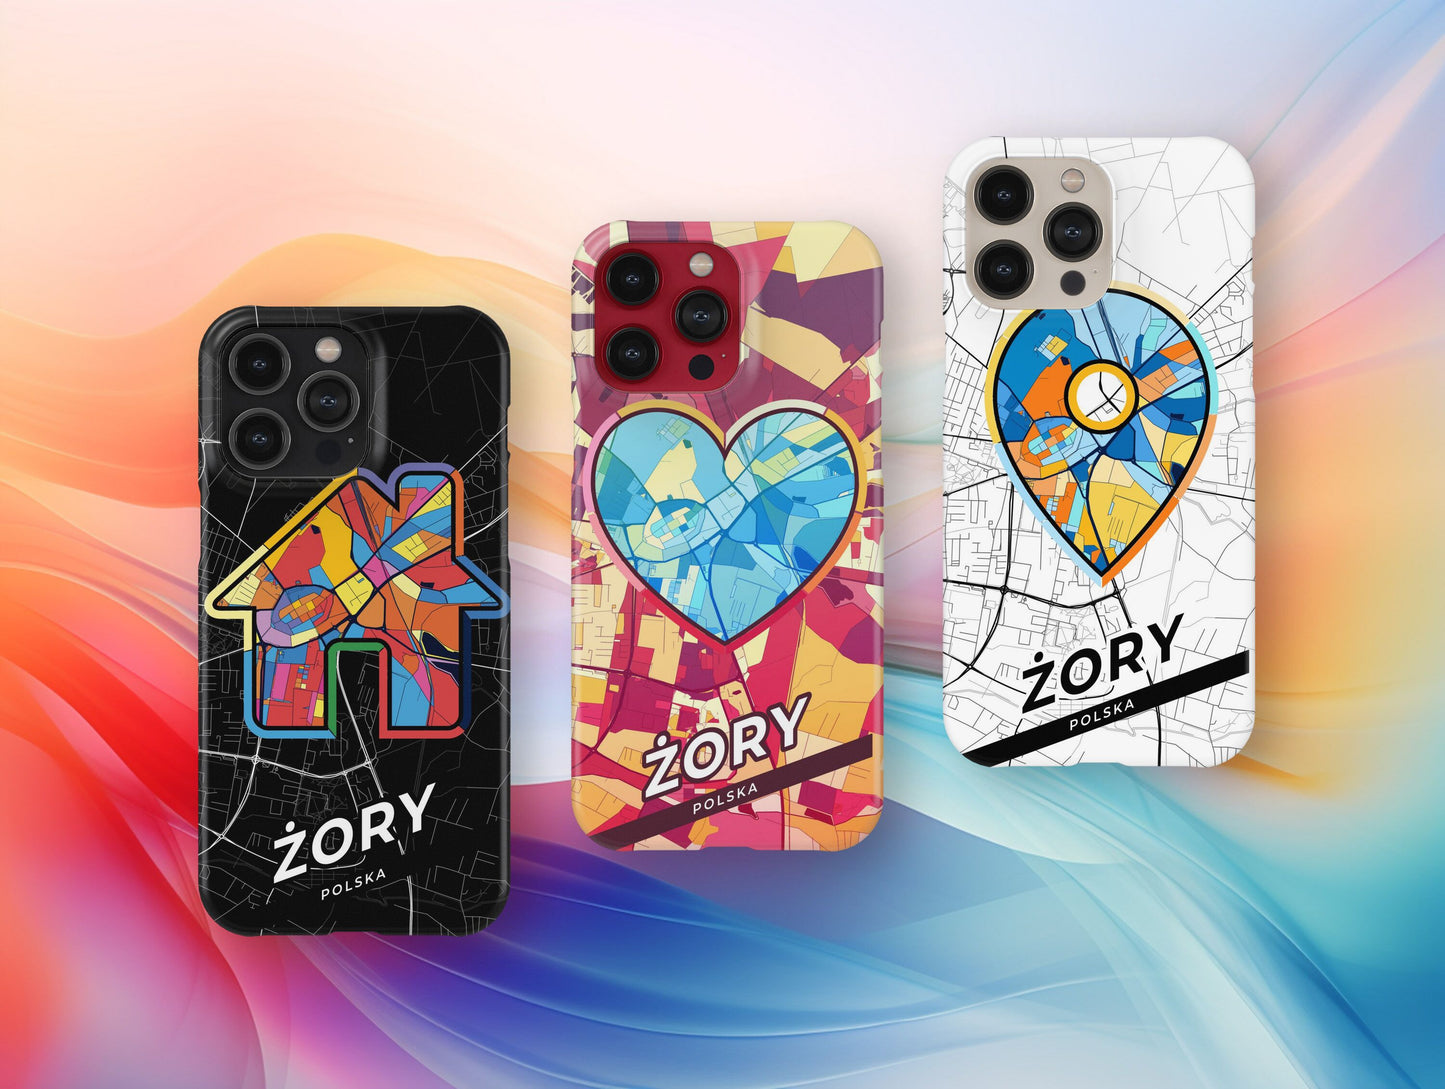 Żory Poland slim phone case with colorful icon